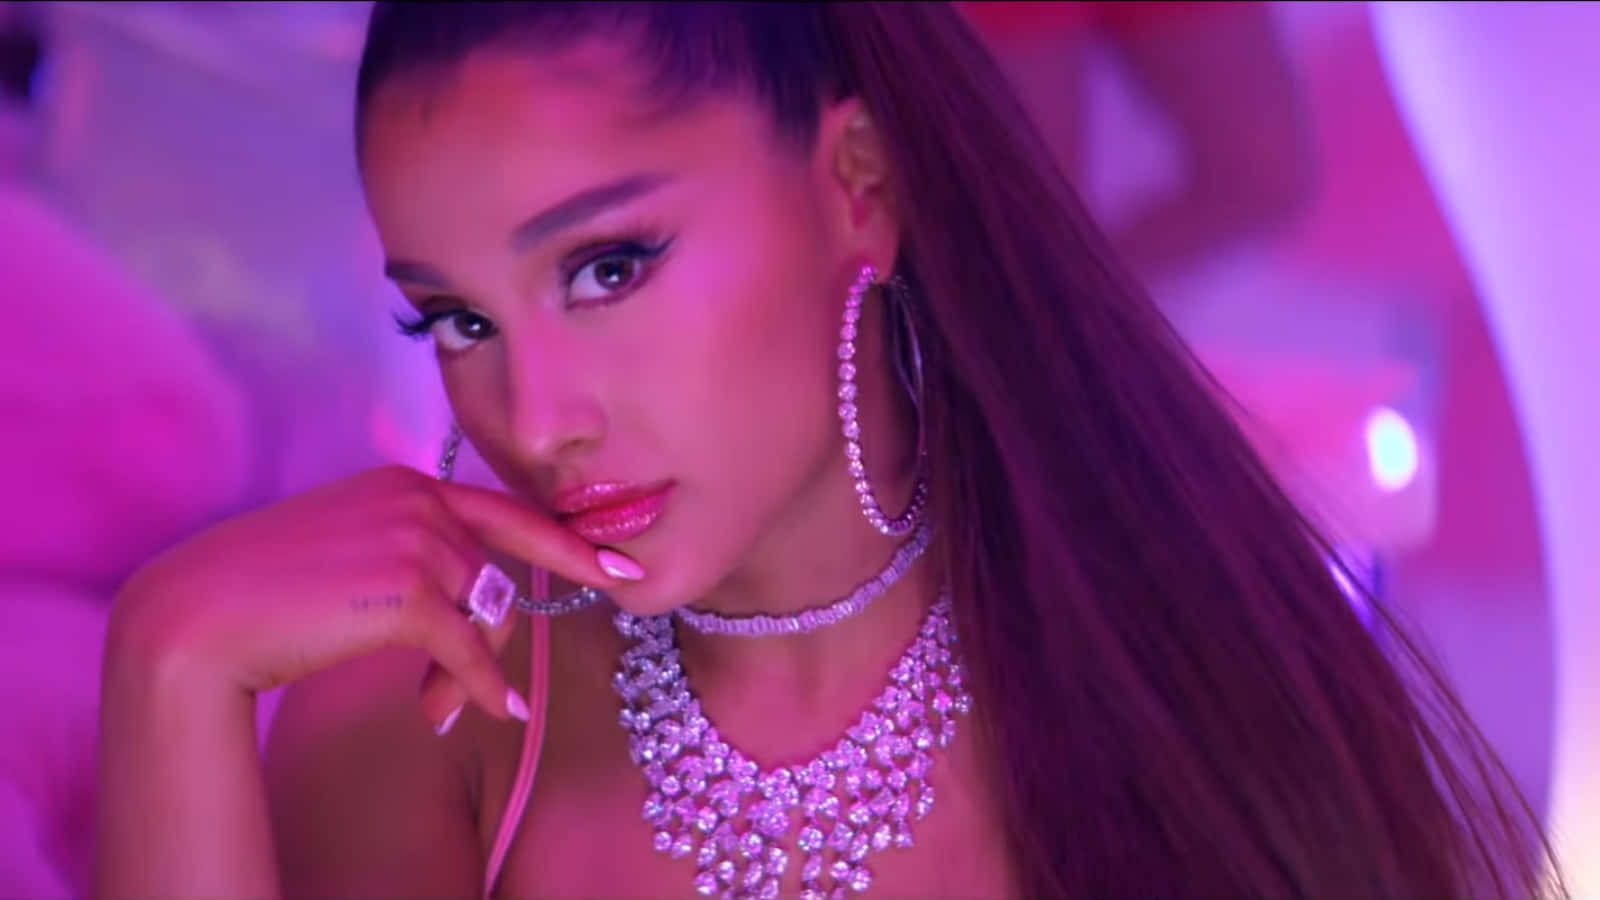 Ariana Grande dancing in front of a rainbow with her 7 Rings as she celebrates 2019 Wallpaper